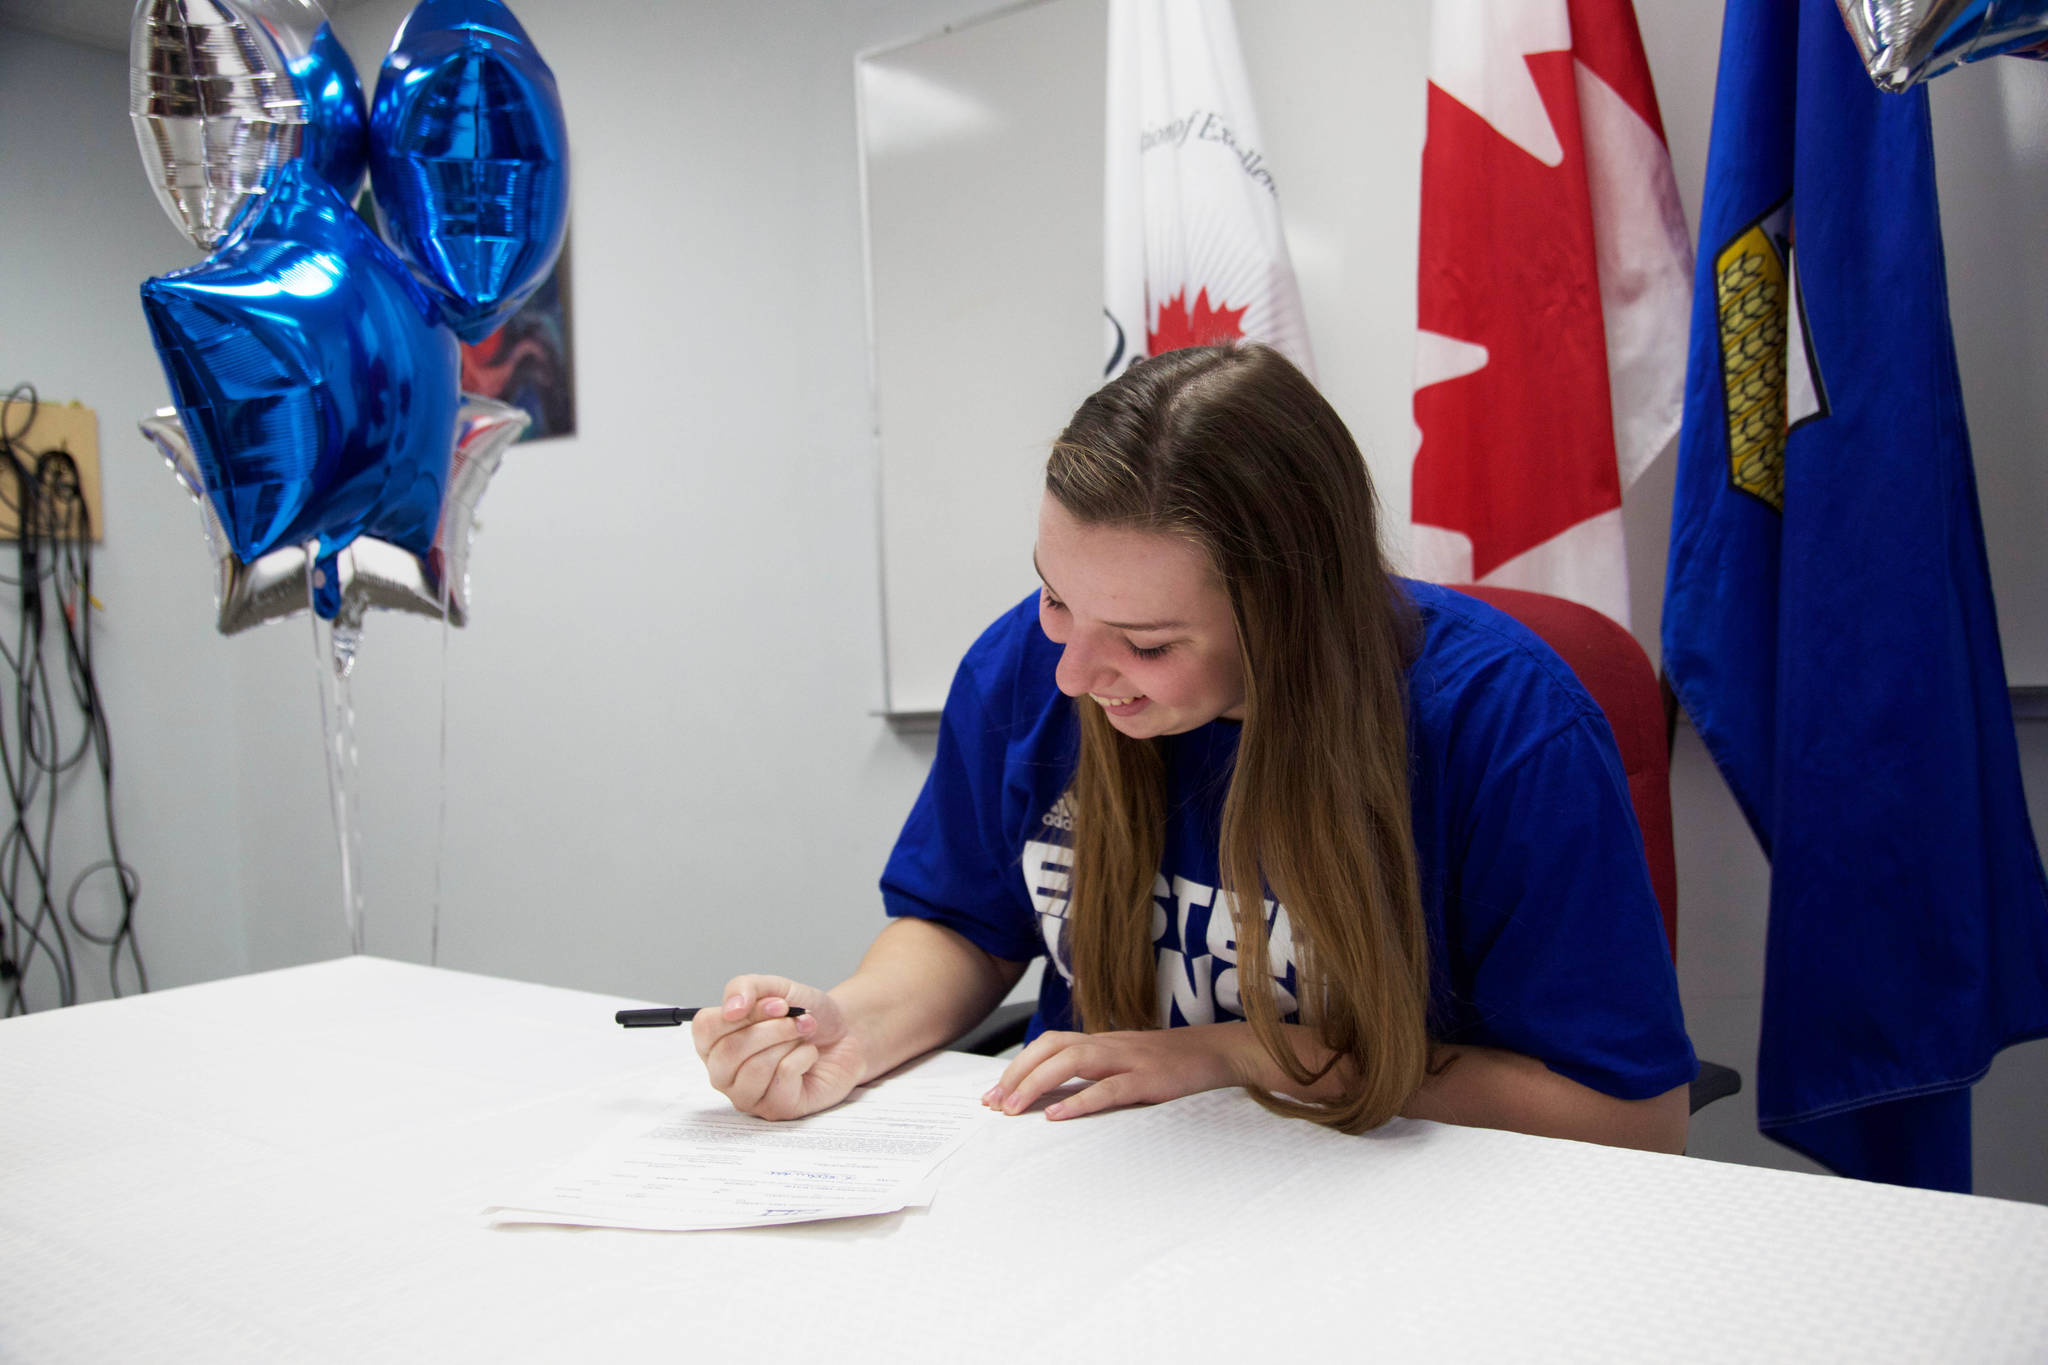 Grade 12 student at Lindsay Thurber High School Joelle Laforce signed a four-year contract to play volleyball with the Eastern Illinois University Panthers next year. She will be attending the university on a scholarship. Robin Grant/Red Deer Express